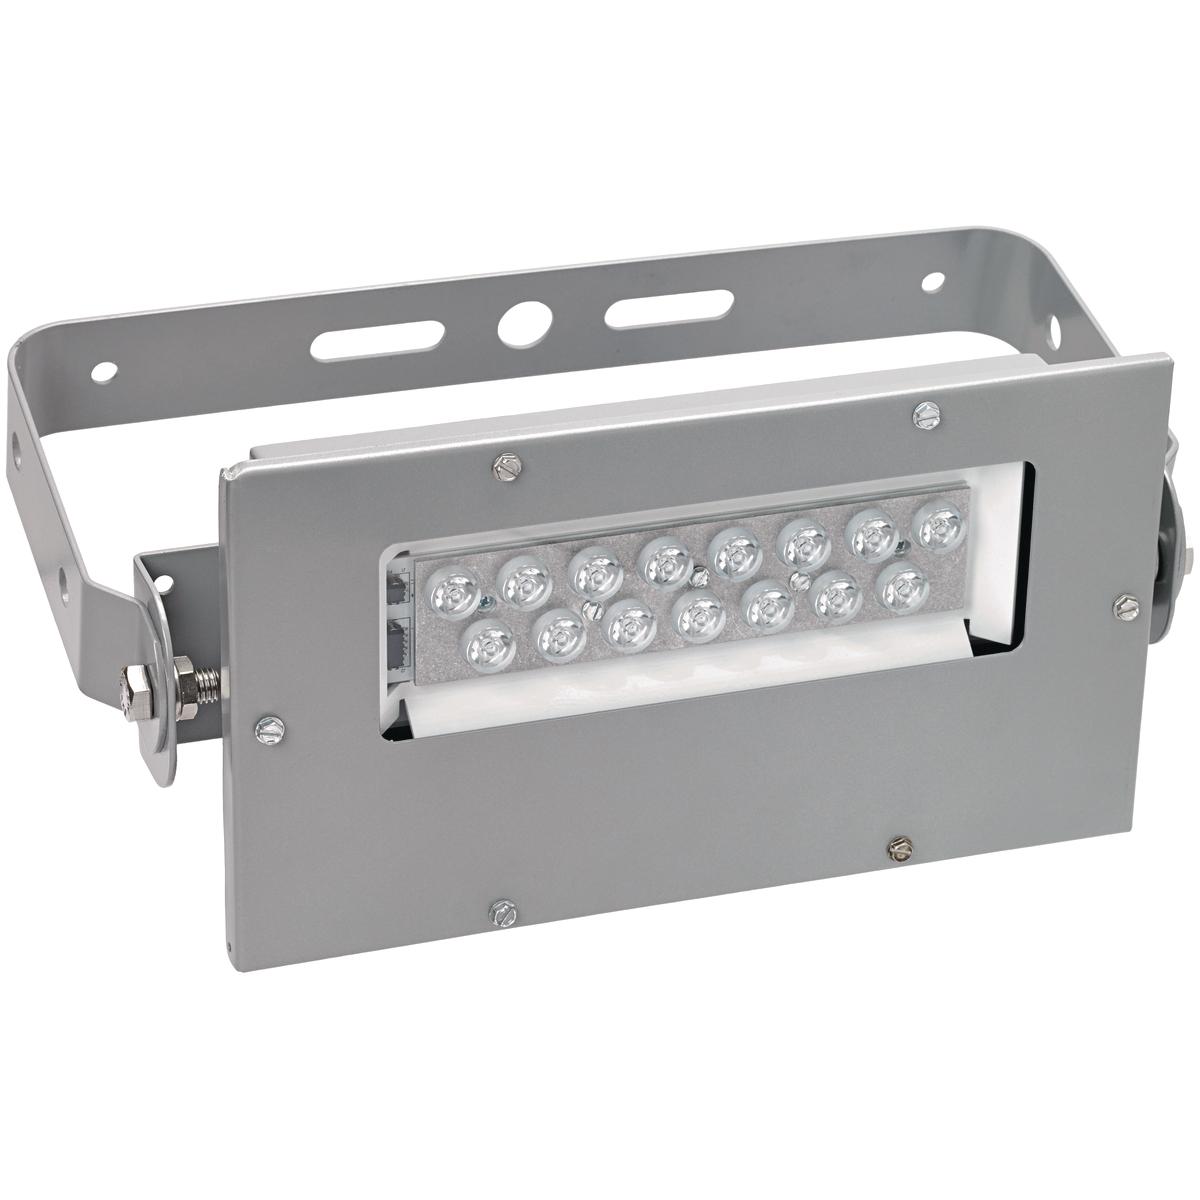 Hubbell KFLC3030-PL The KFLC Series compact LED floodlights are designed with a copper-free aluminum housing and painted with a powder epoxy finish for superior corrosion resistance in harsh and hazardous environments. Killark LED floodlights provide a crisp white light that